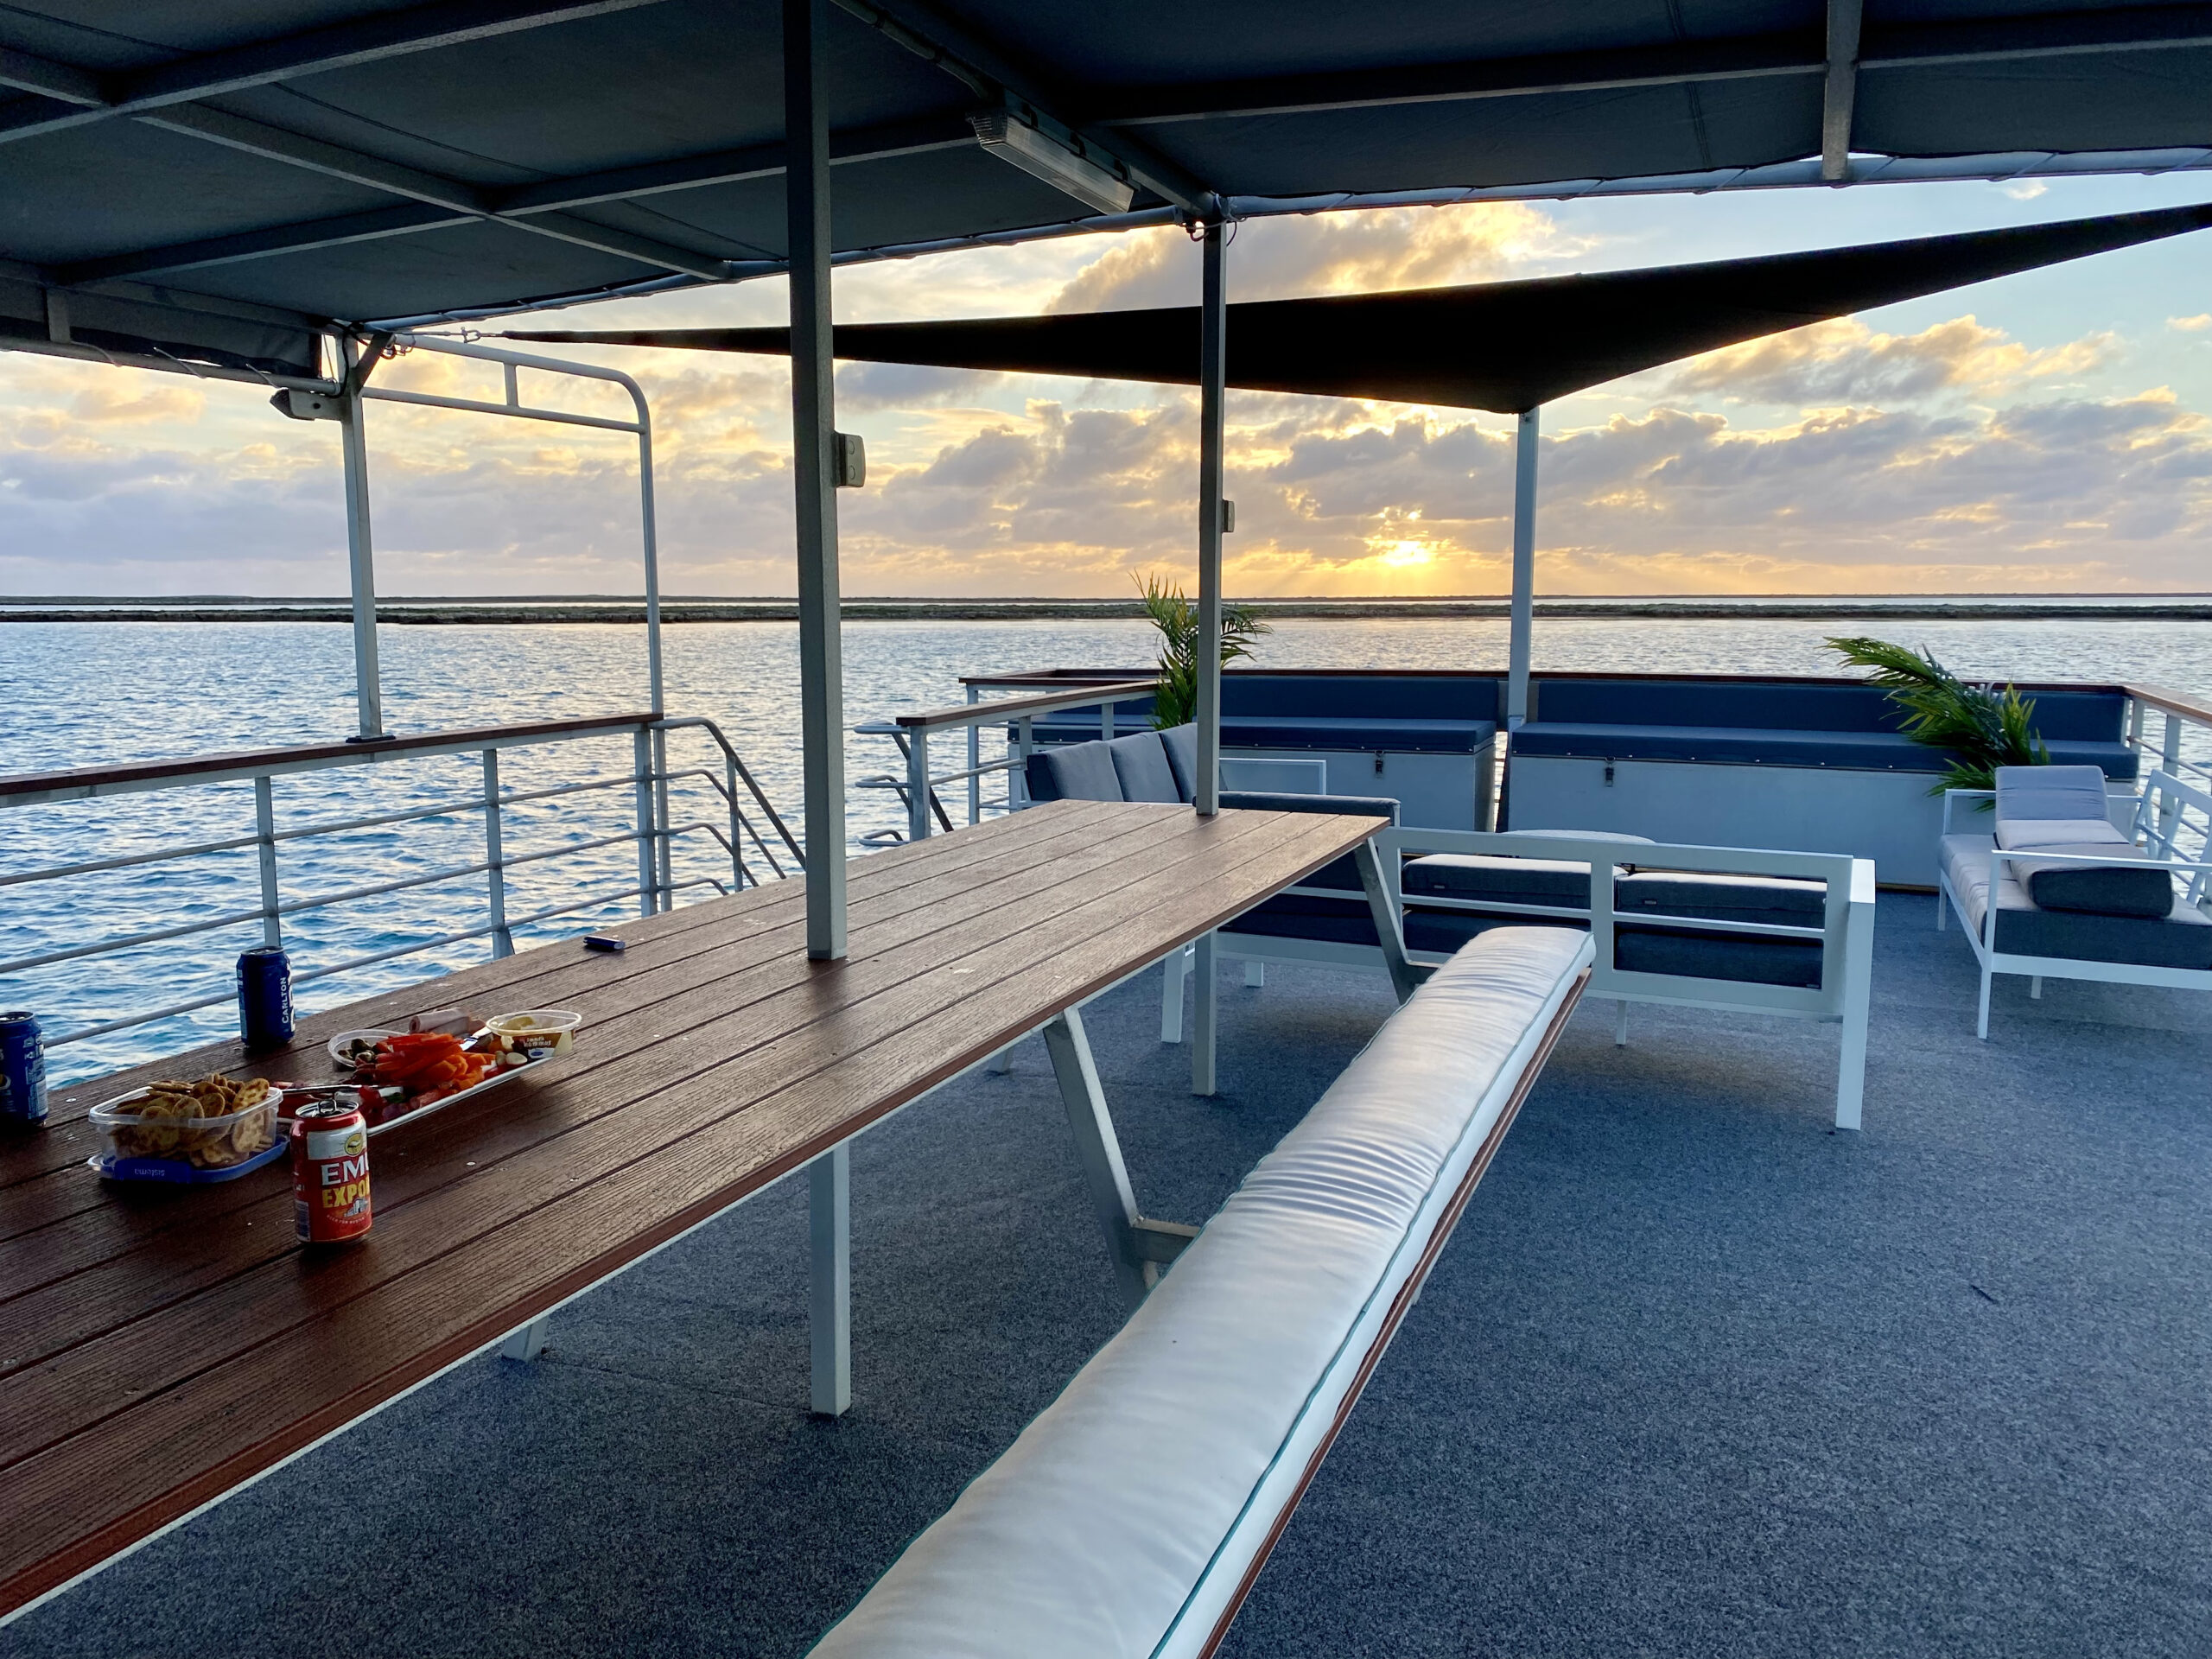 'The Abrolhos Sea Shack' - Floating Accommodation Barge